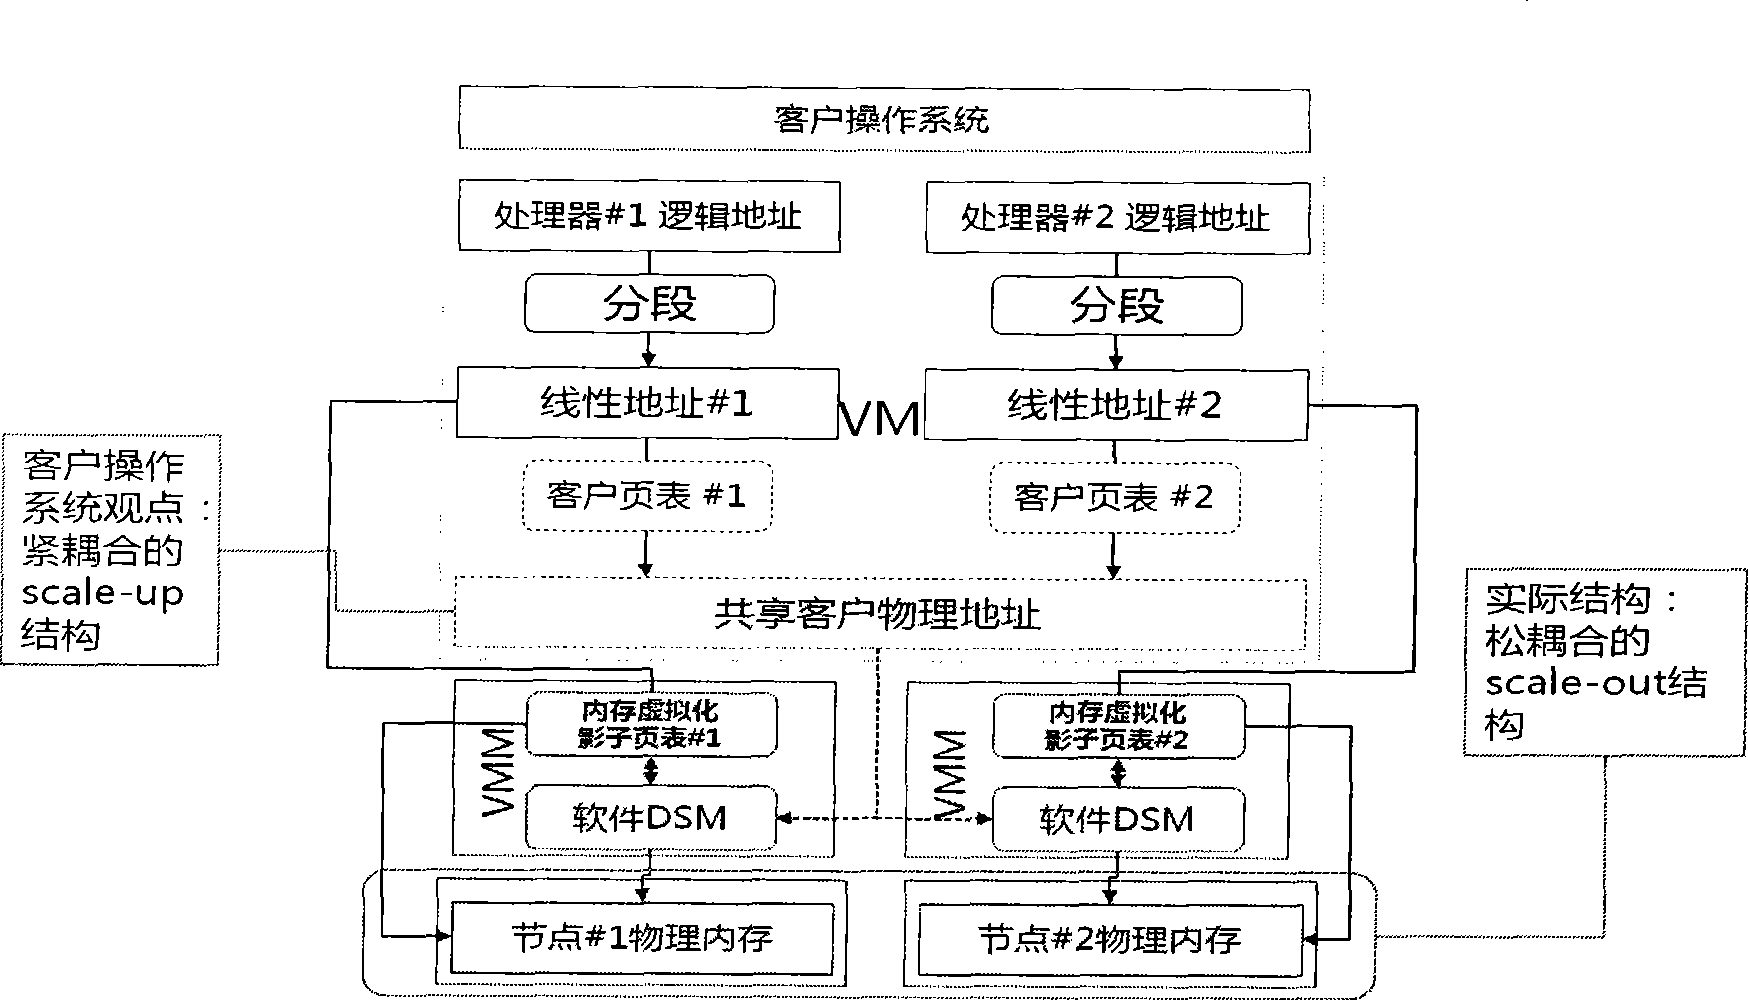 Implementing method for distributed internal memory virtualization technology